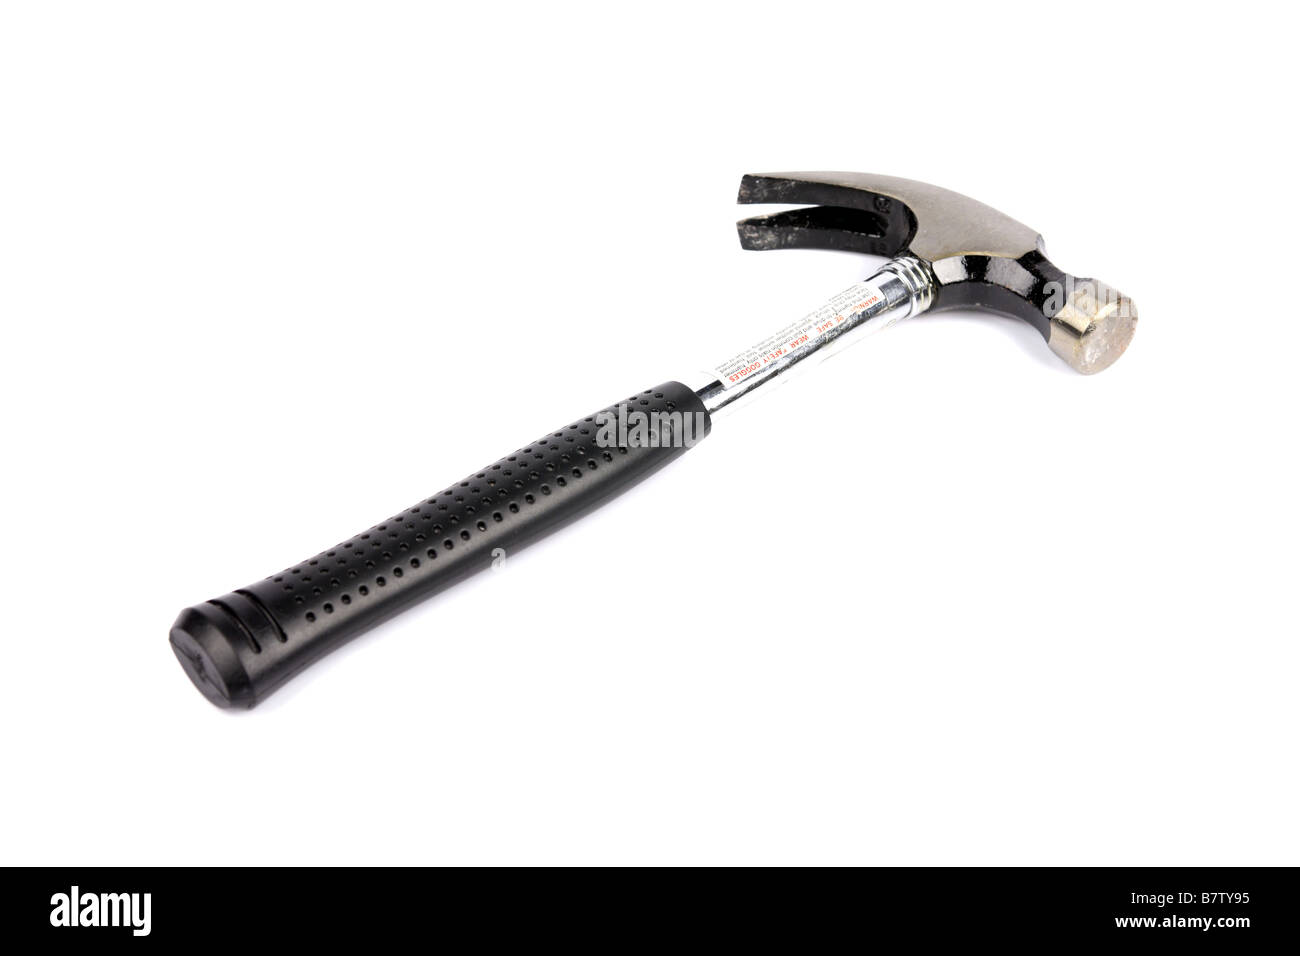 Rubber handled claw hammer against a white background Stock Photo